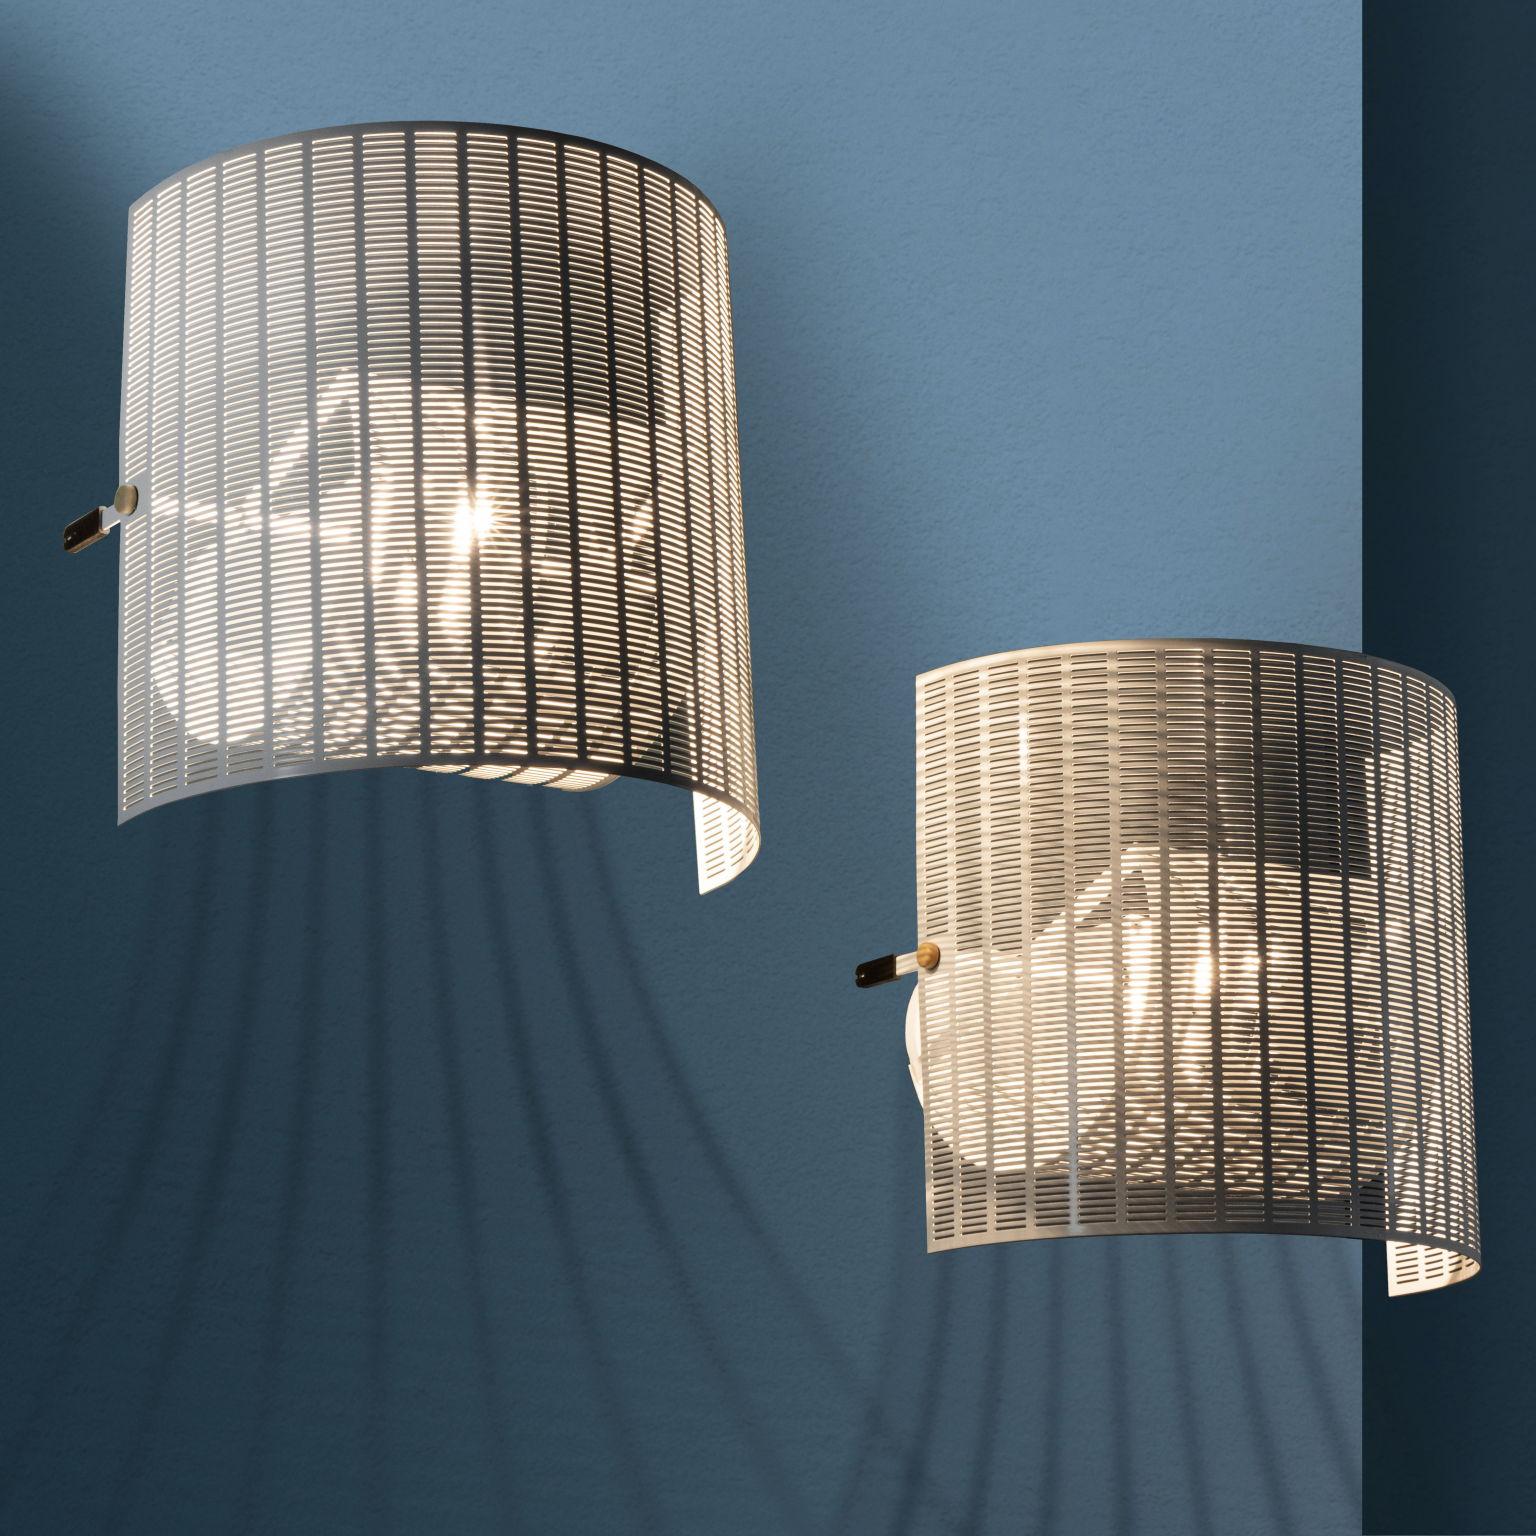 Pair of wall lamps model 'Shogun' designed by Mario Botta and  produced by Artemide since the 1980s. Made of white lacquered metal, they feature adjustable lampshades, useful for  vary the lighting effect.
